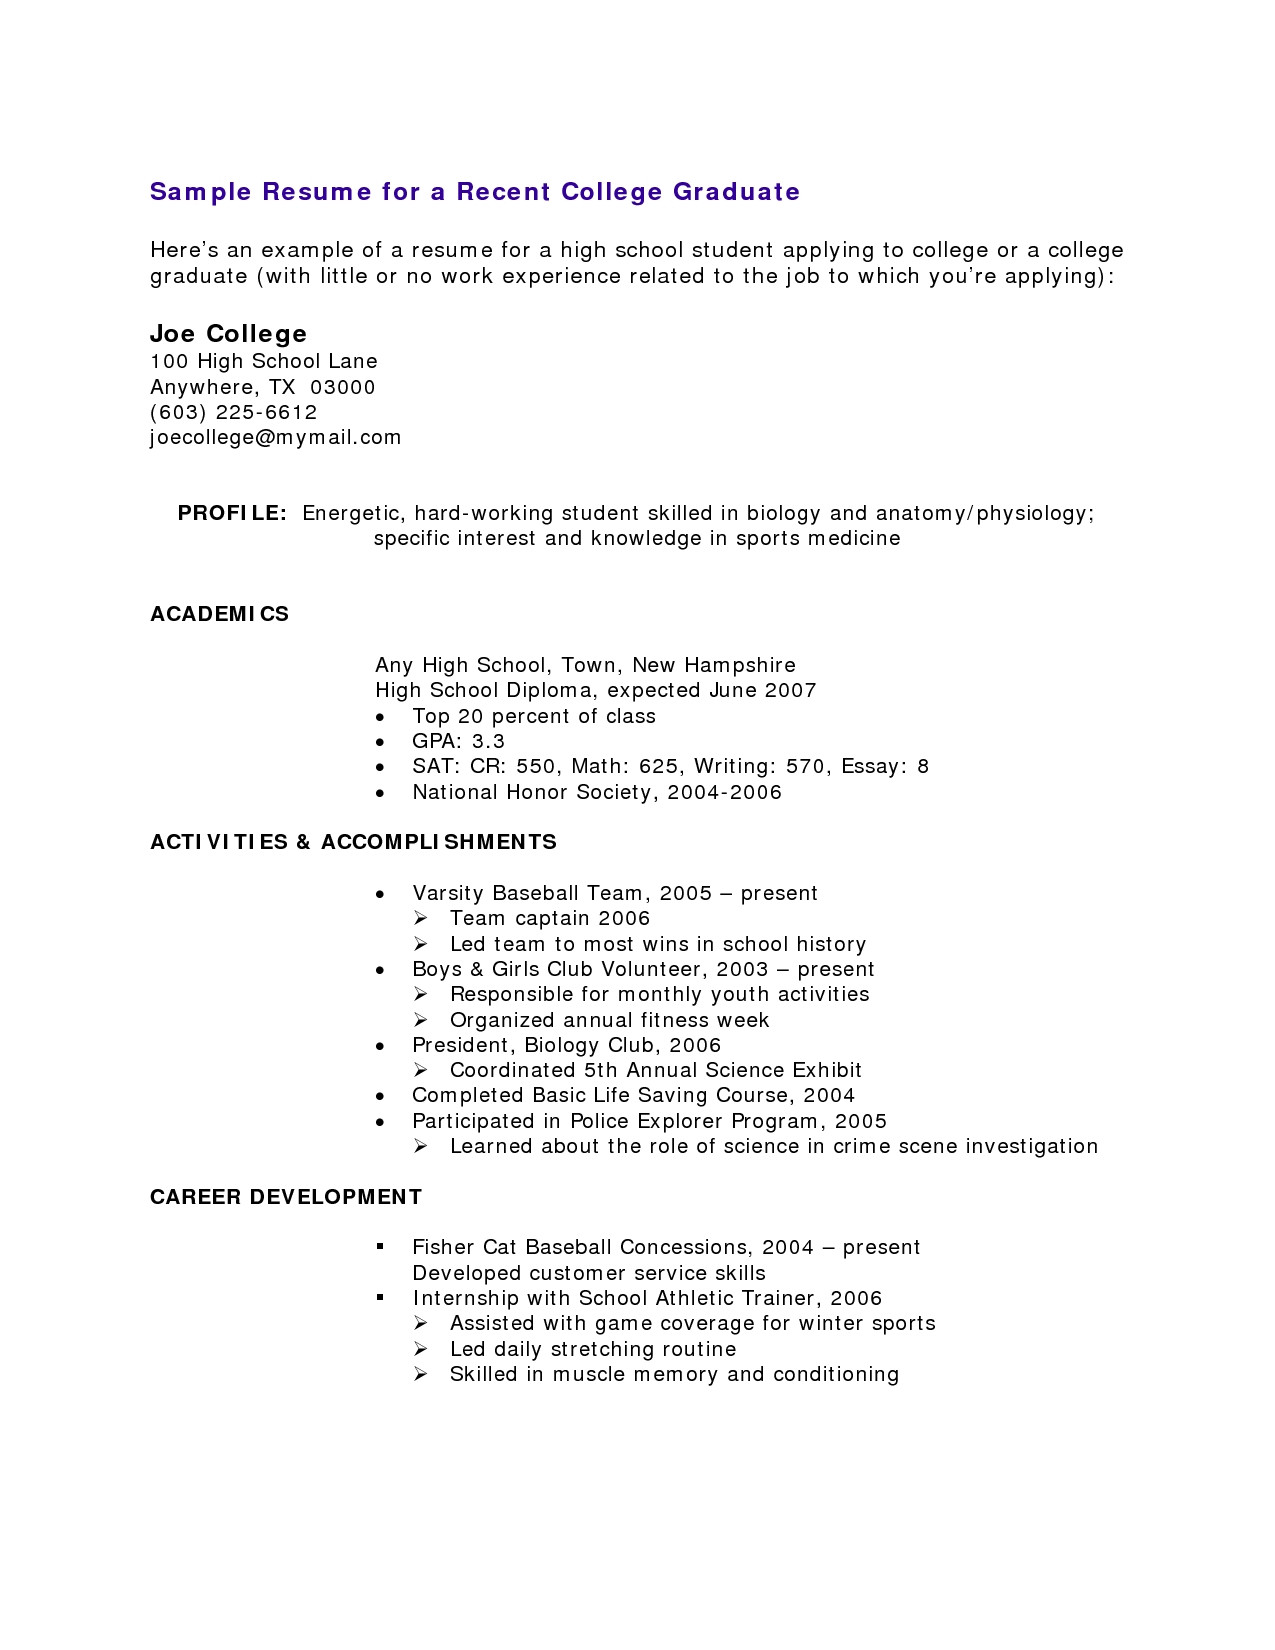 how to make resume for job with noml